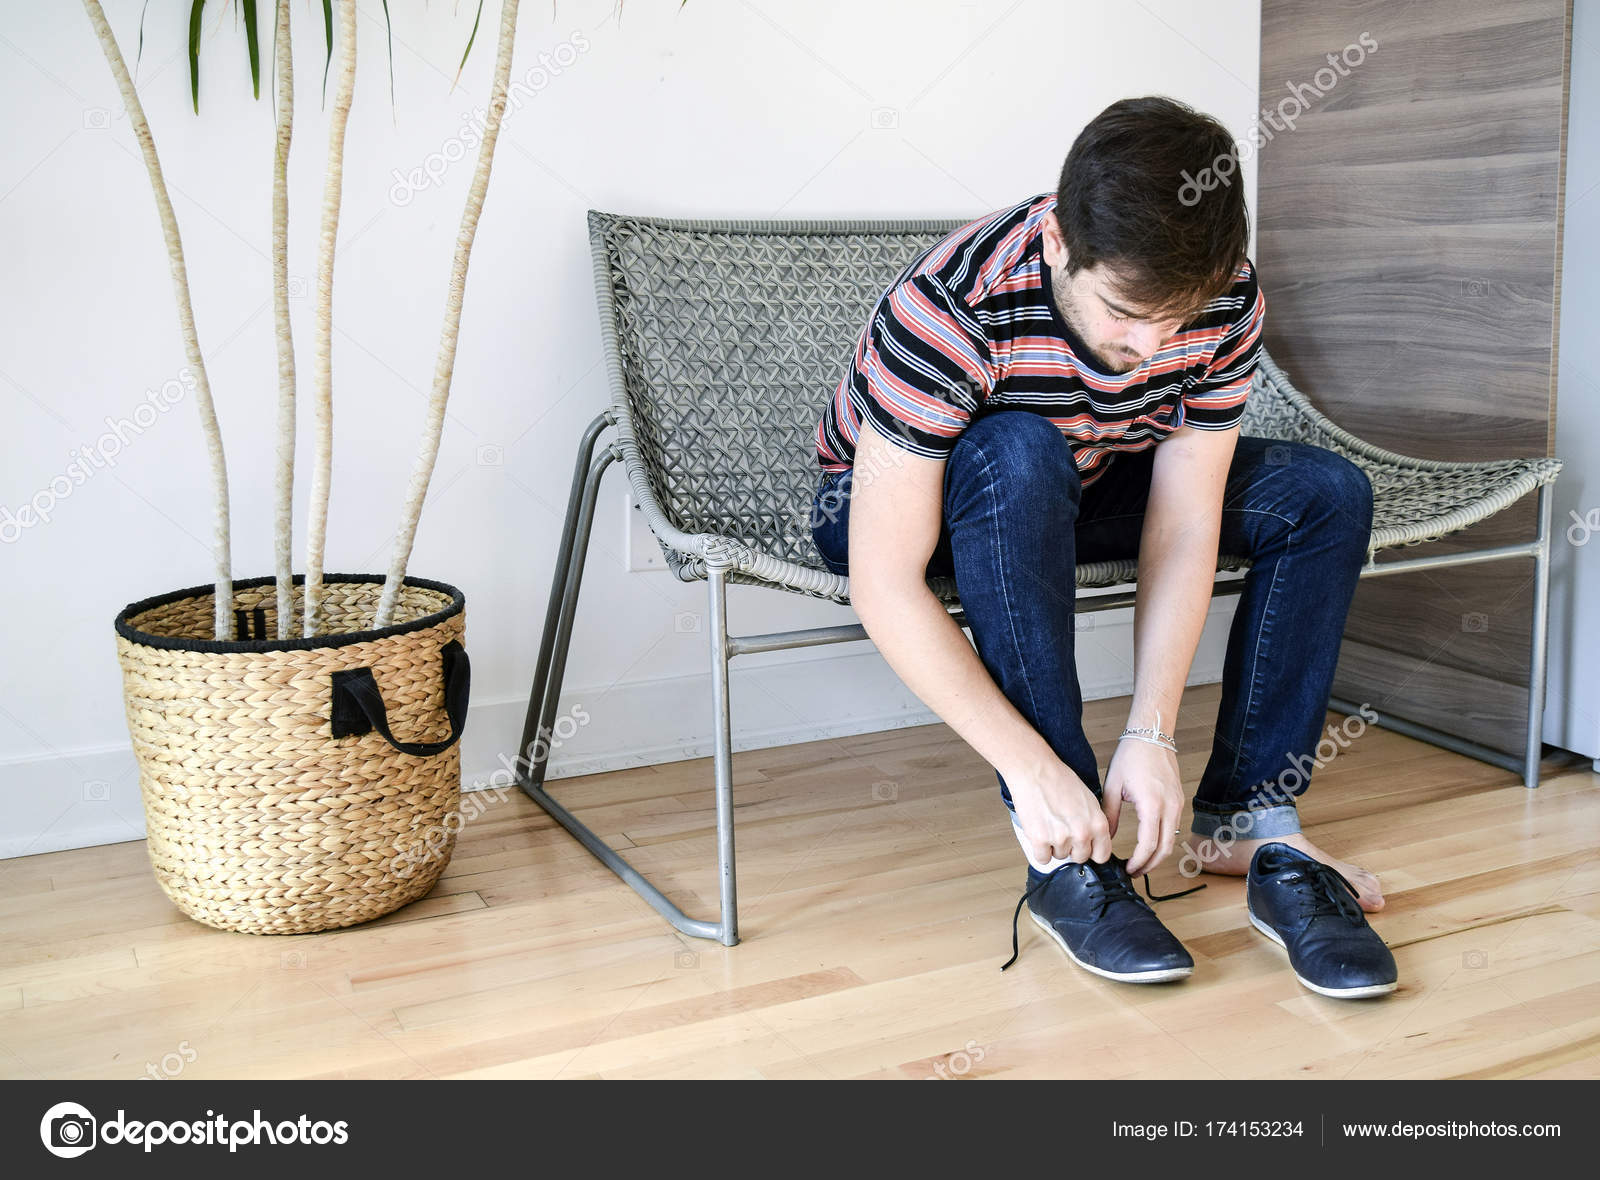 Man putting on his shoes Stock Photo by ©cabecademarmore 174153234